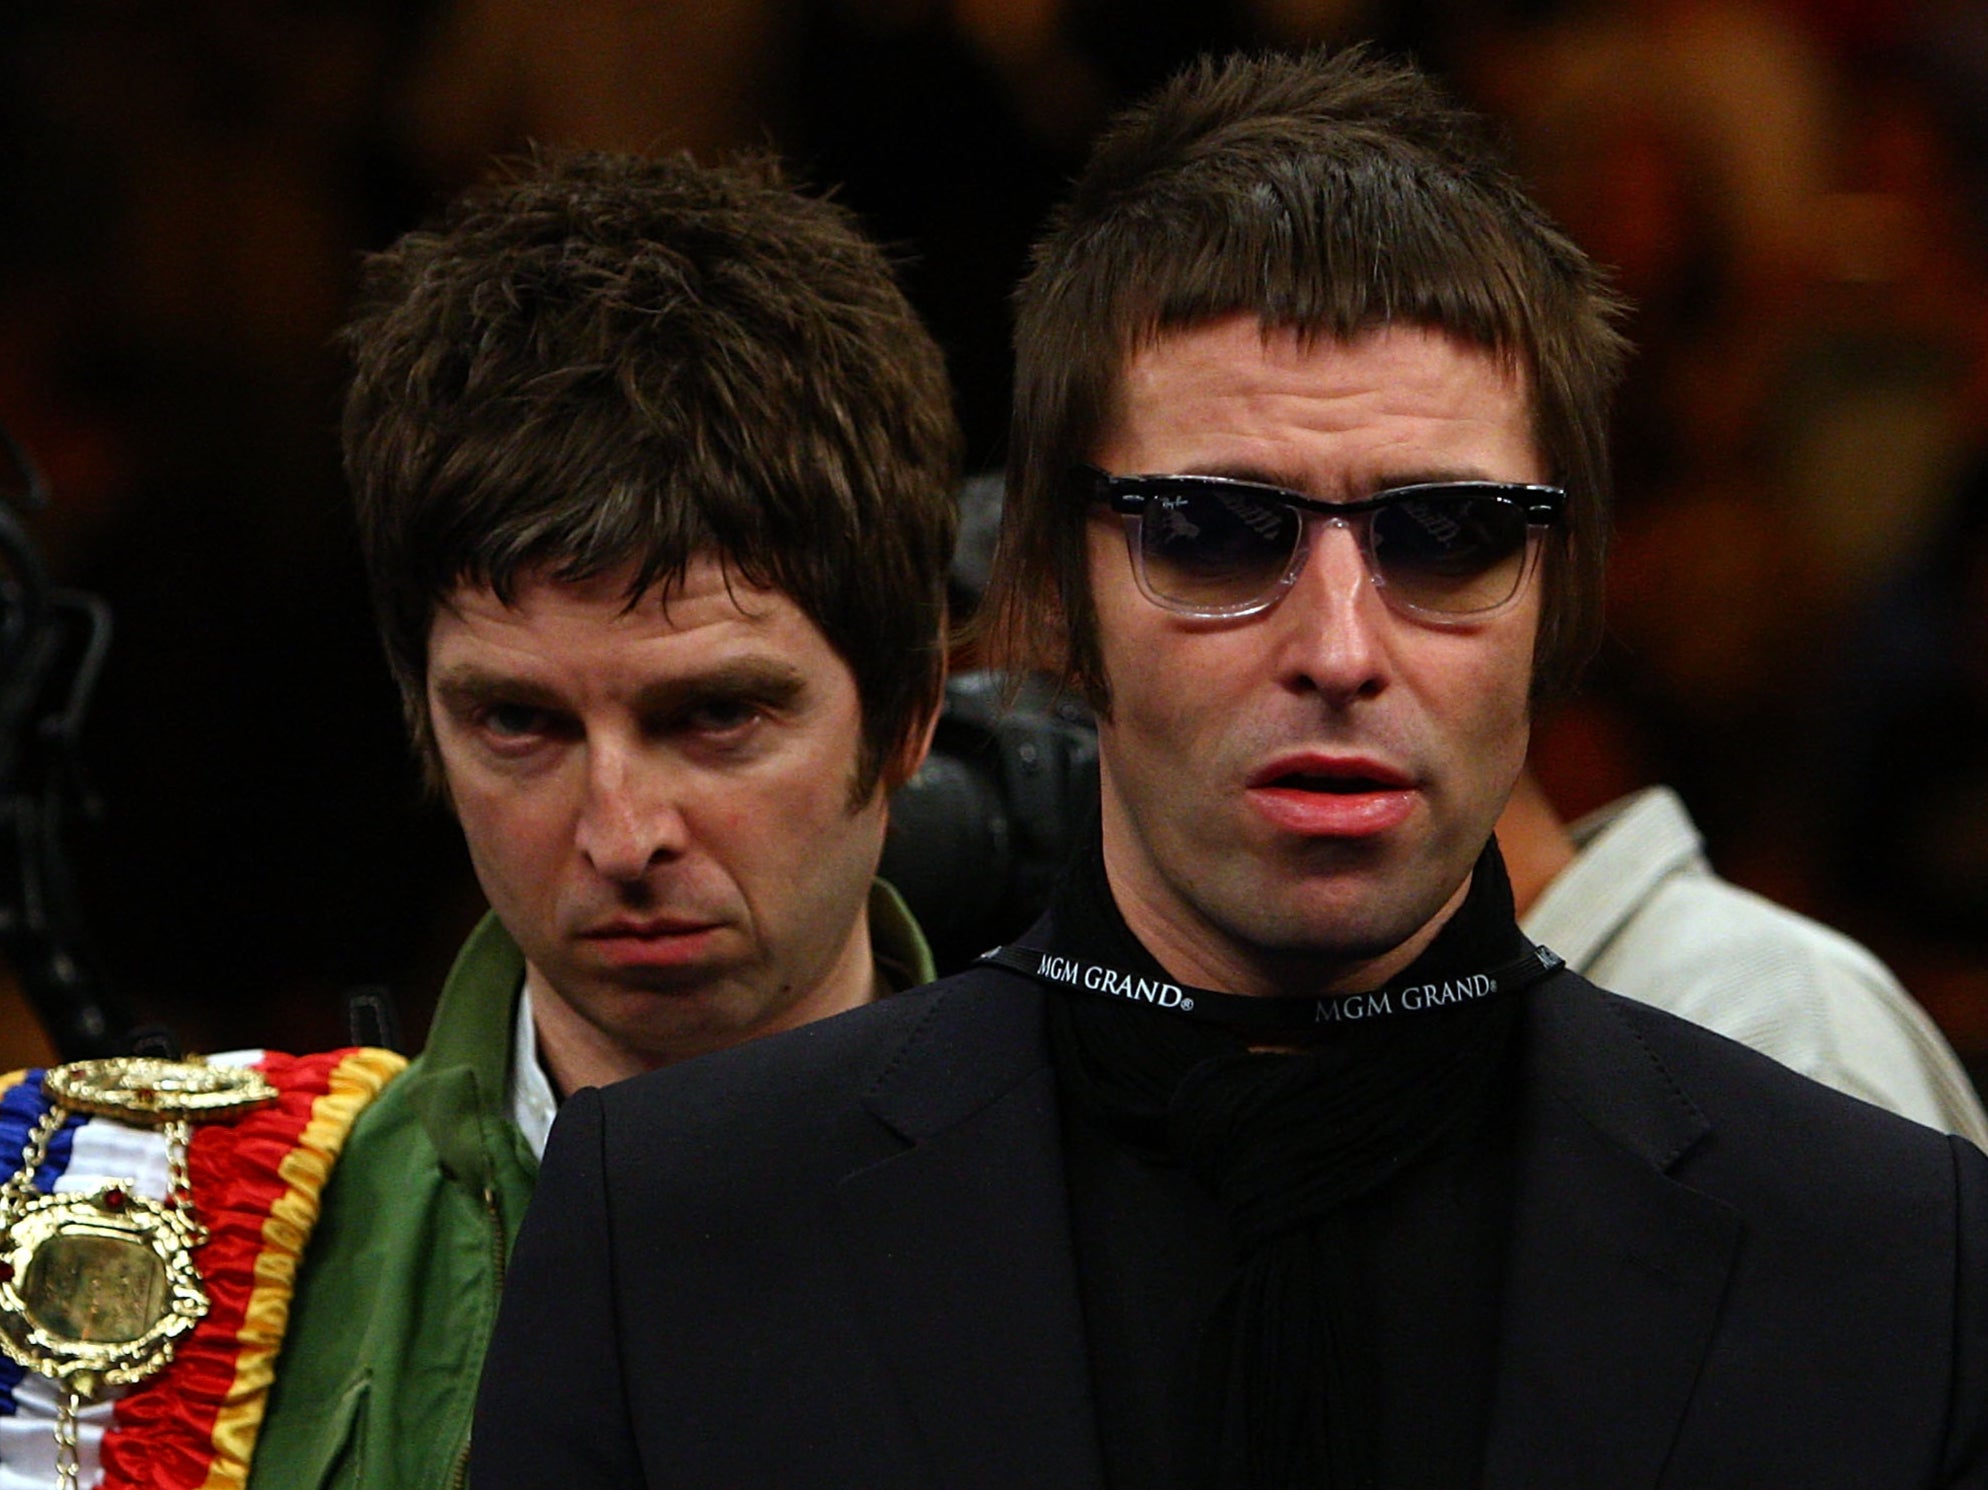 It’s time for Noel and Liam Gallagher to bring Oasis back